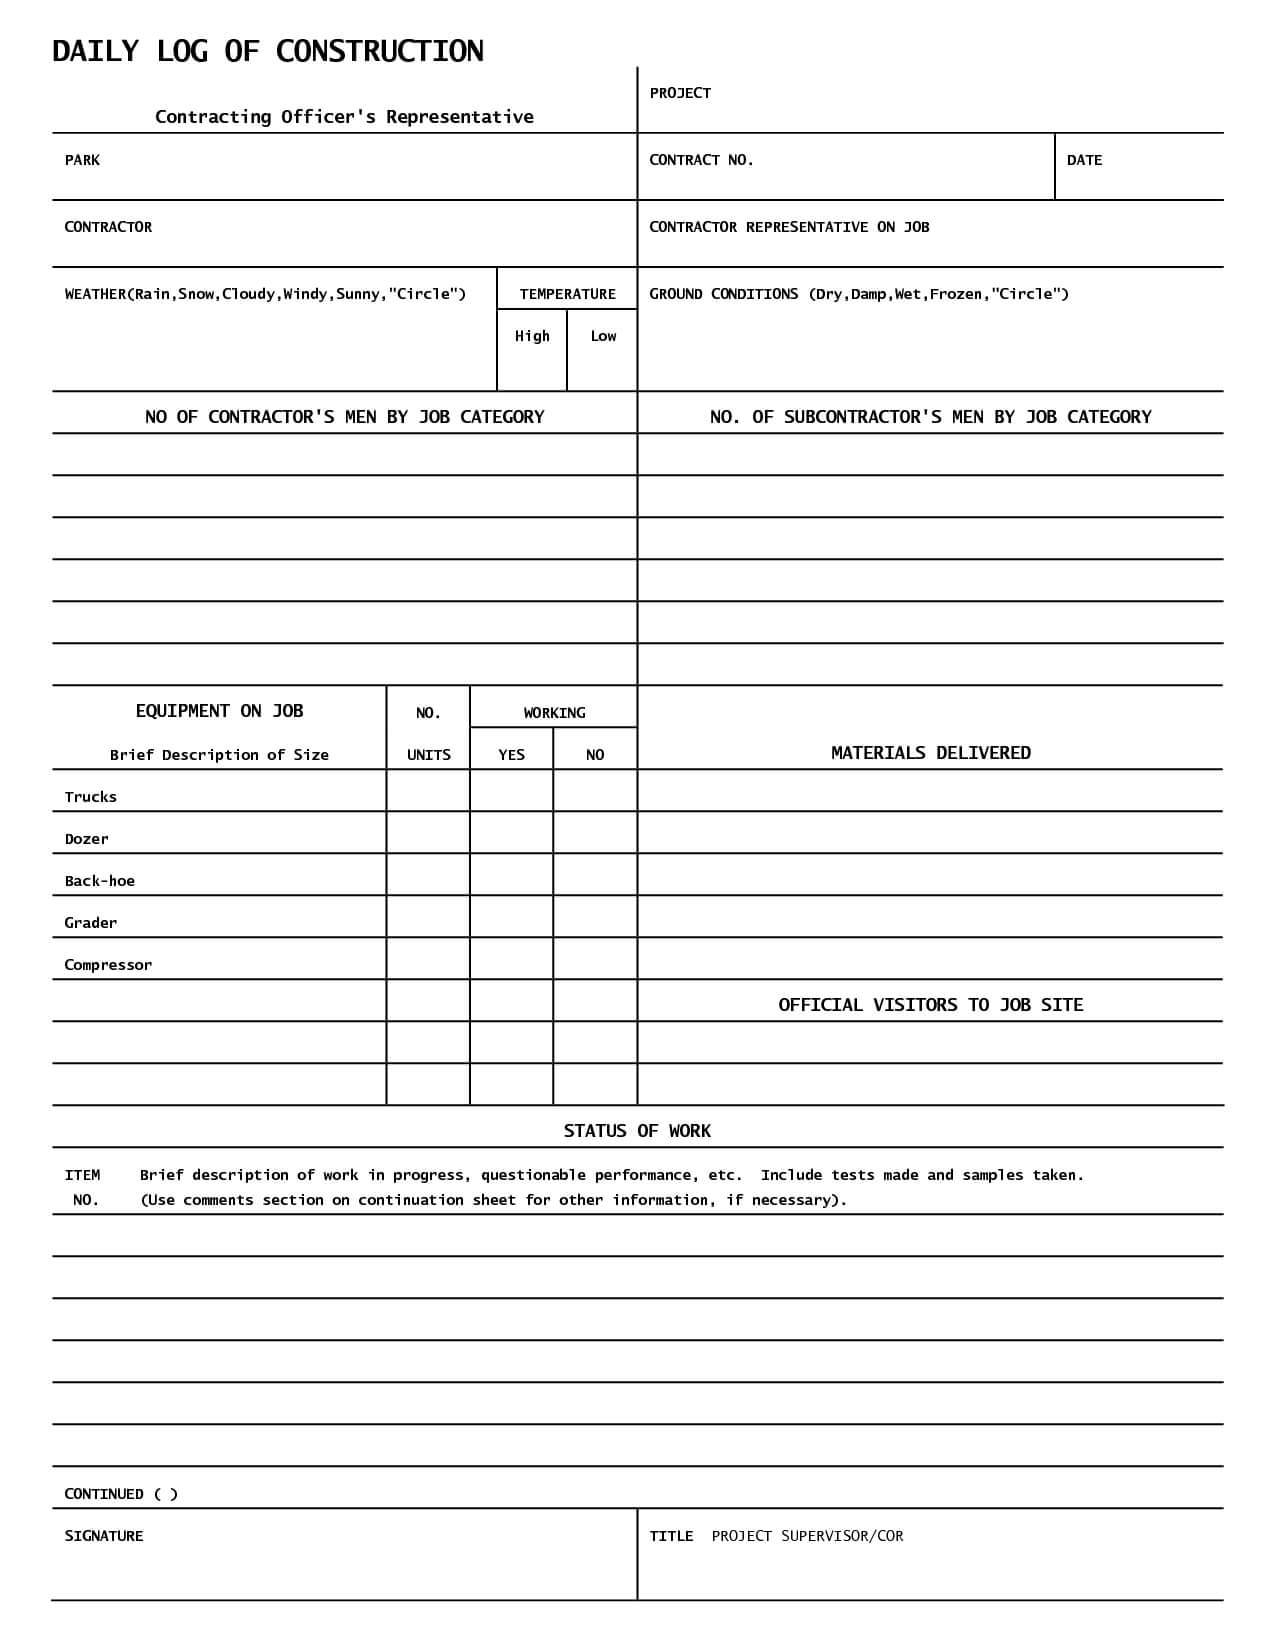 Daily Log Template For Construction – Printable Schedule With Regard To Construction Daily Report Template Free